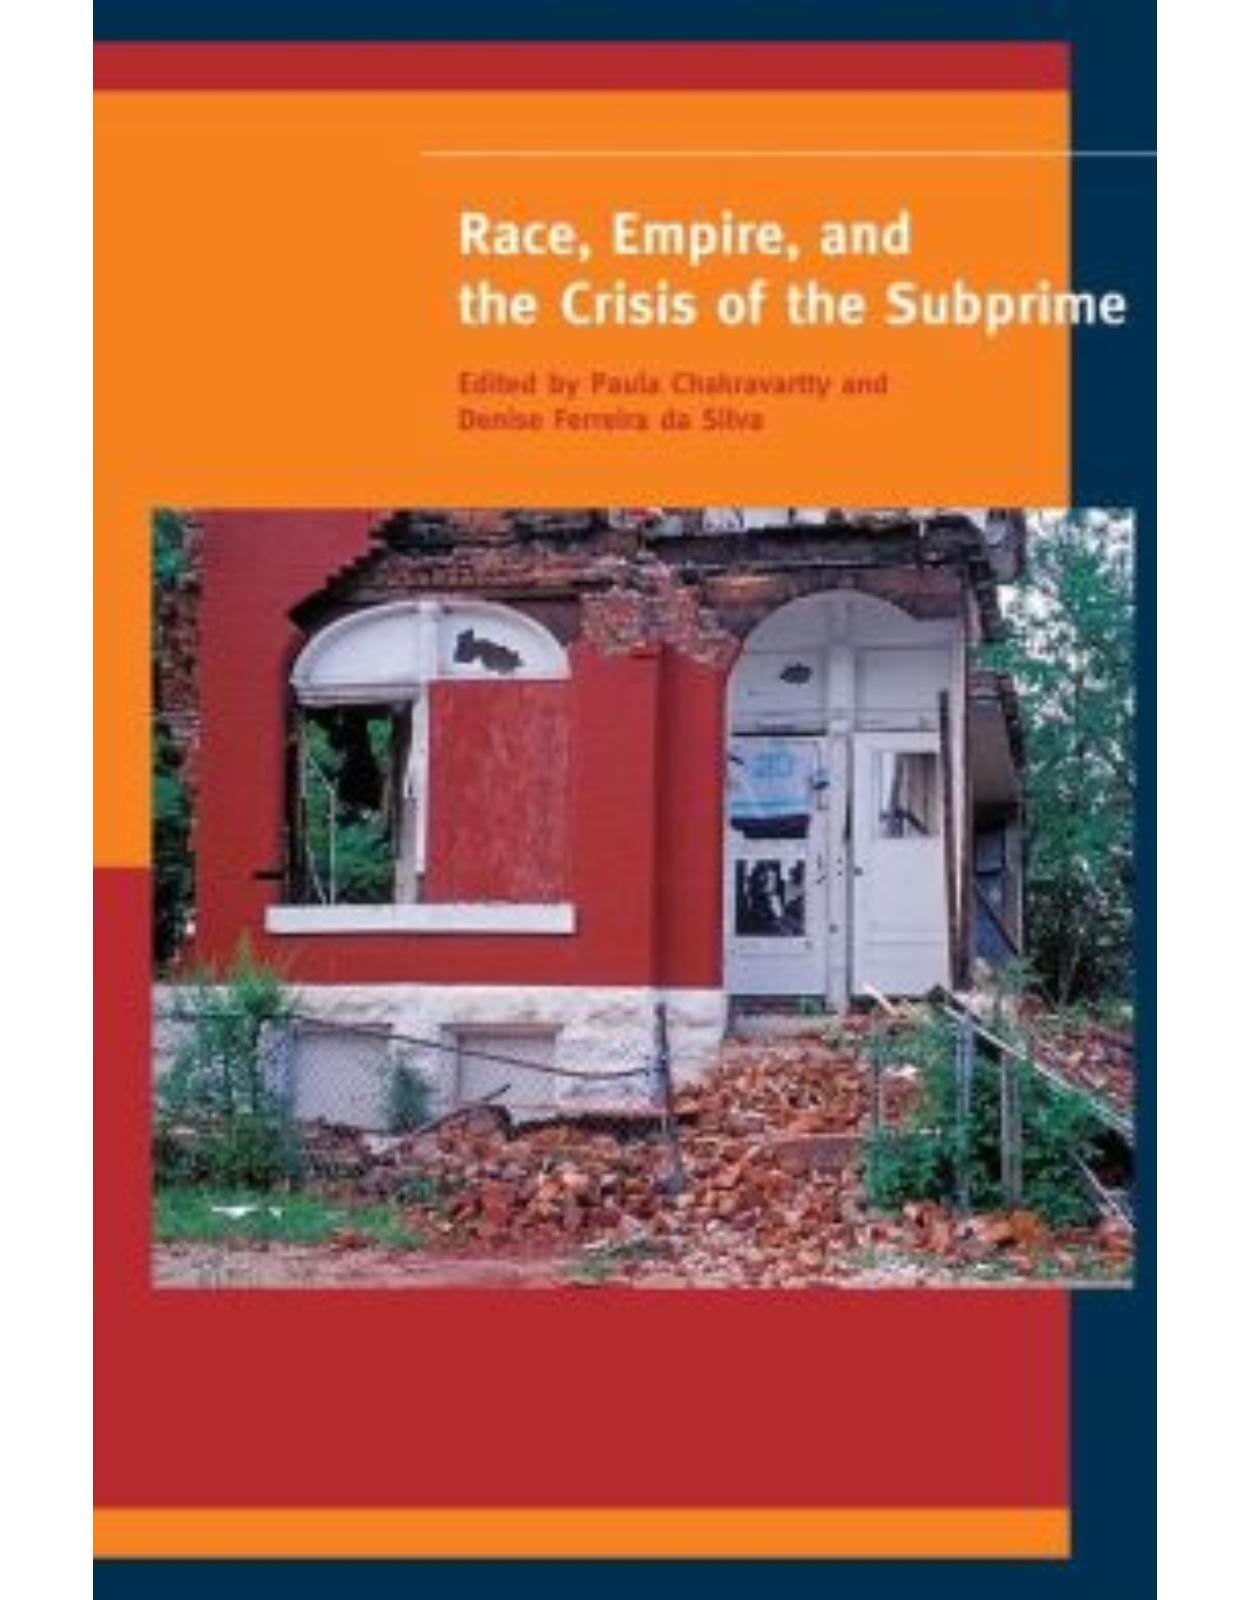 Race, Empire, and the Crisis of the Subprime.